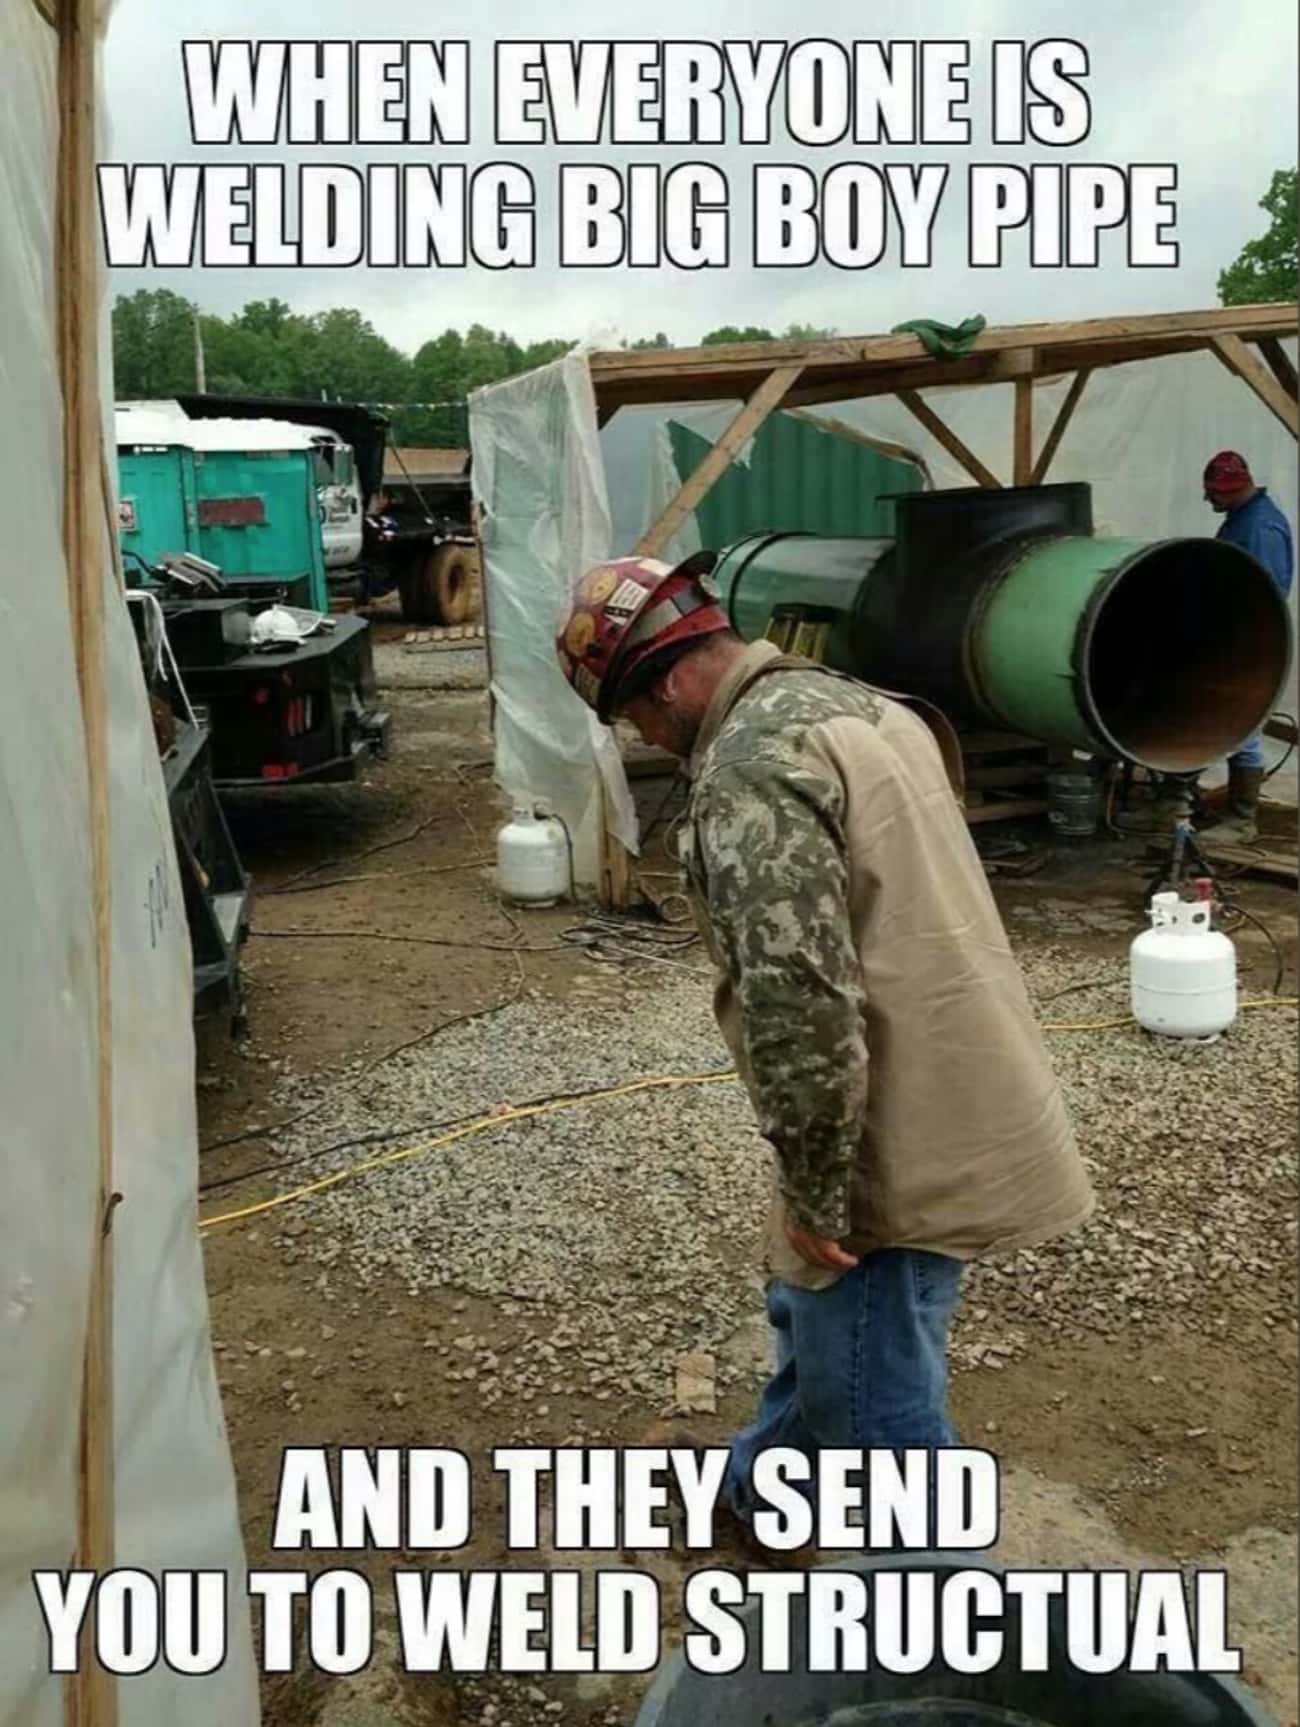 We Don't Understand These Welder Memes But Maybe Your Welder Friends Will